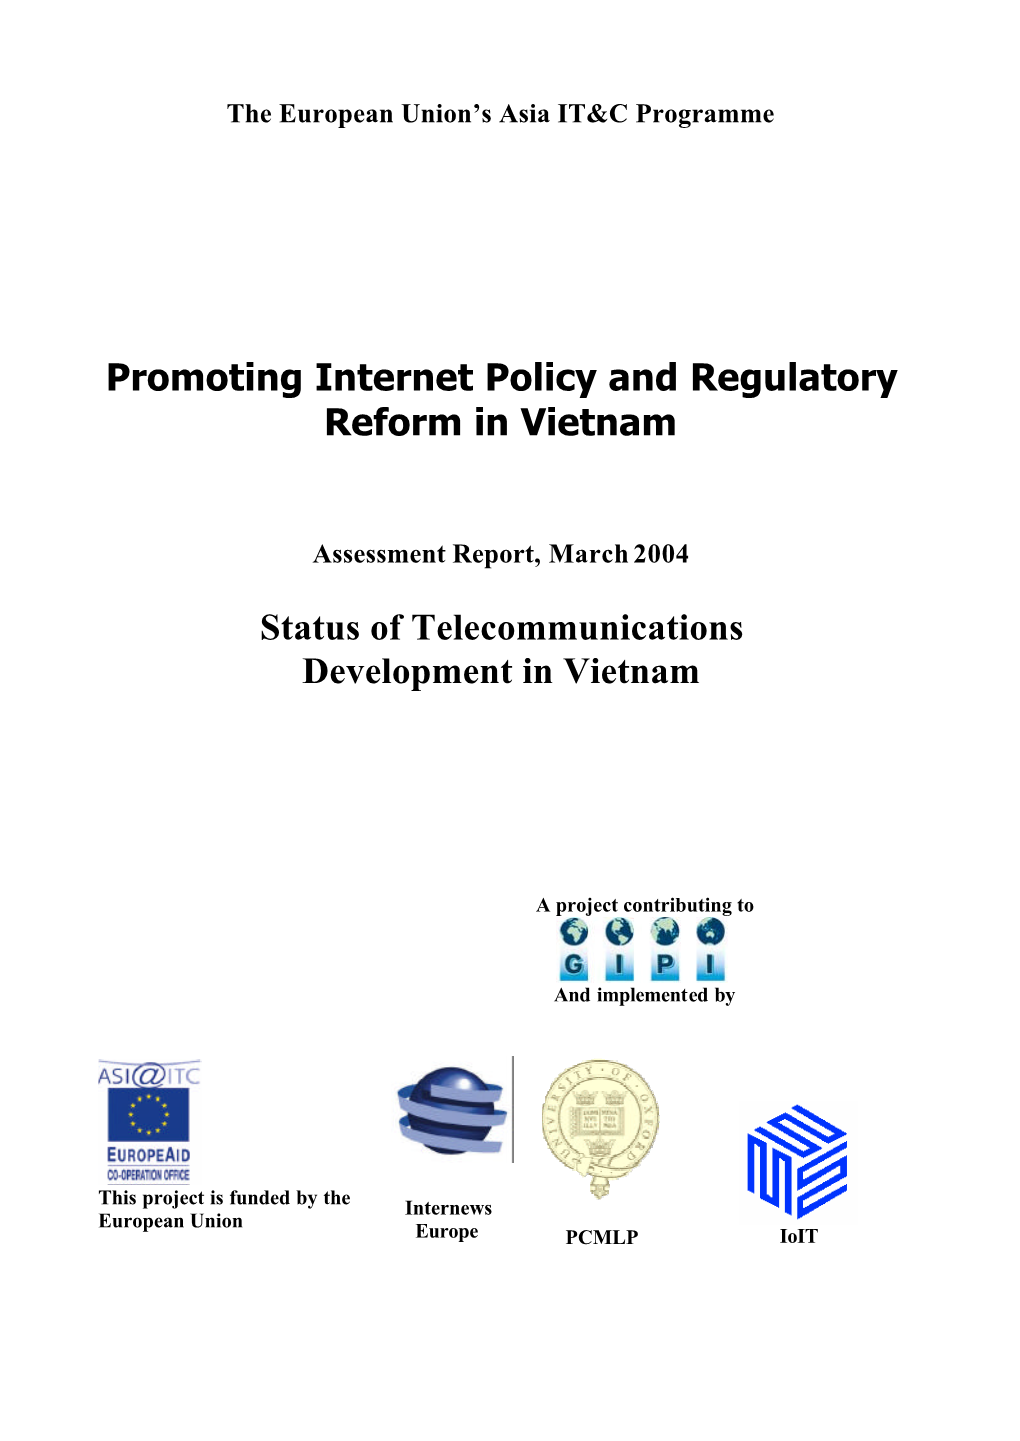 Promoting Internet Policy and Regulatory Reform in Vietnam